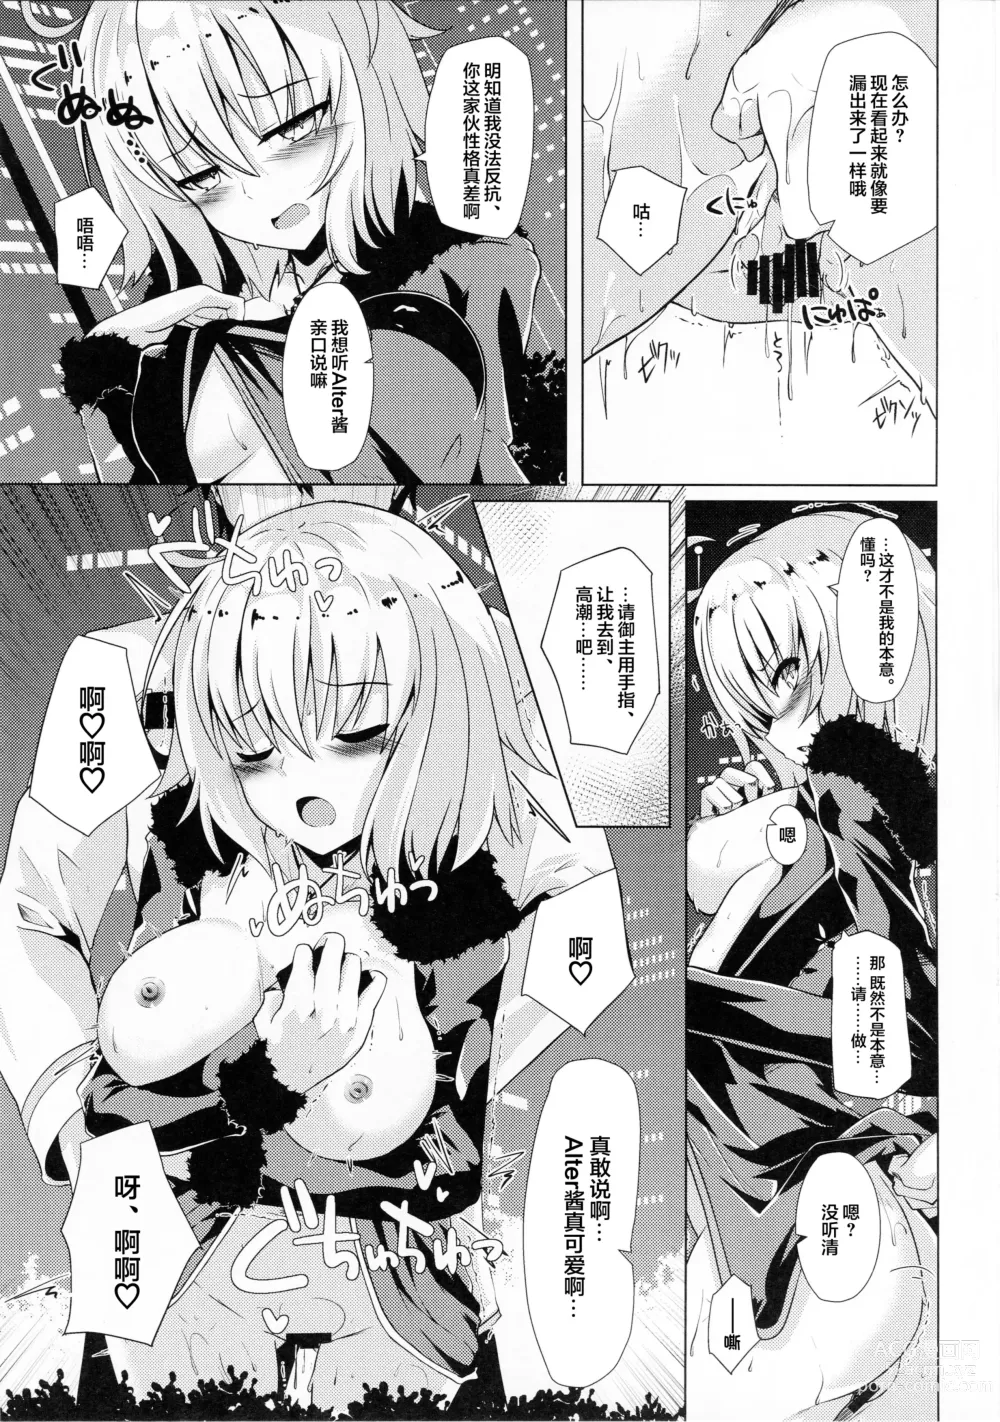 Page 6 of doujinshi Alter酱和爱之灵药和自我束缚卷轴